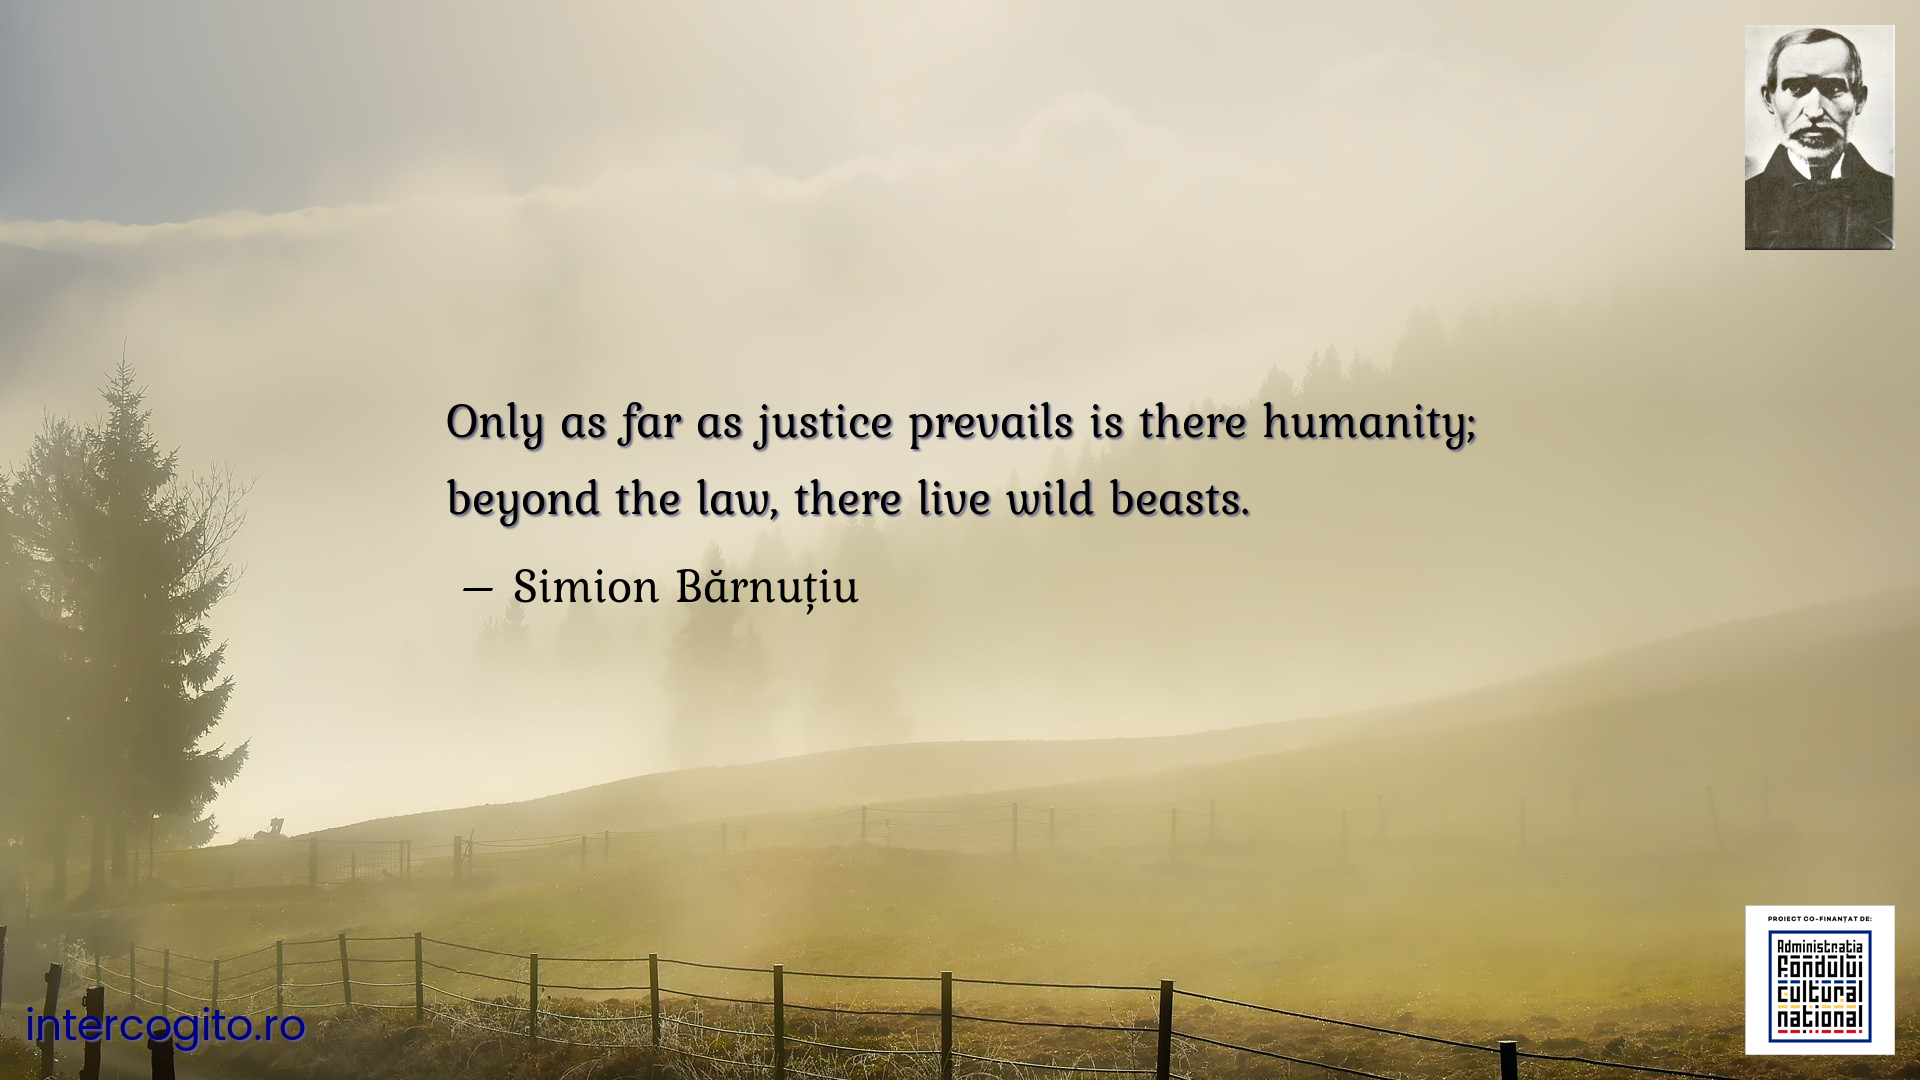 Only as far as justice prevails is there humanity; beyond the law, there live wild beasts.